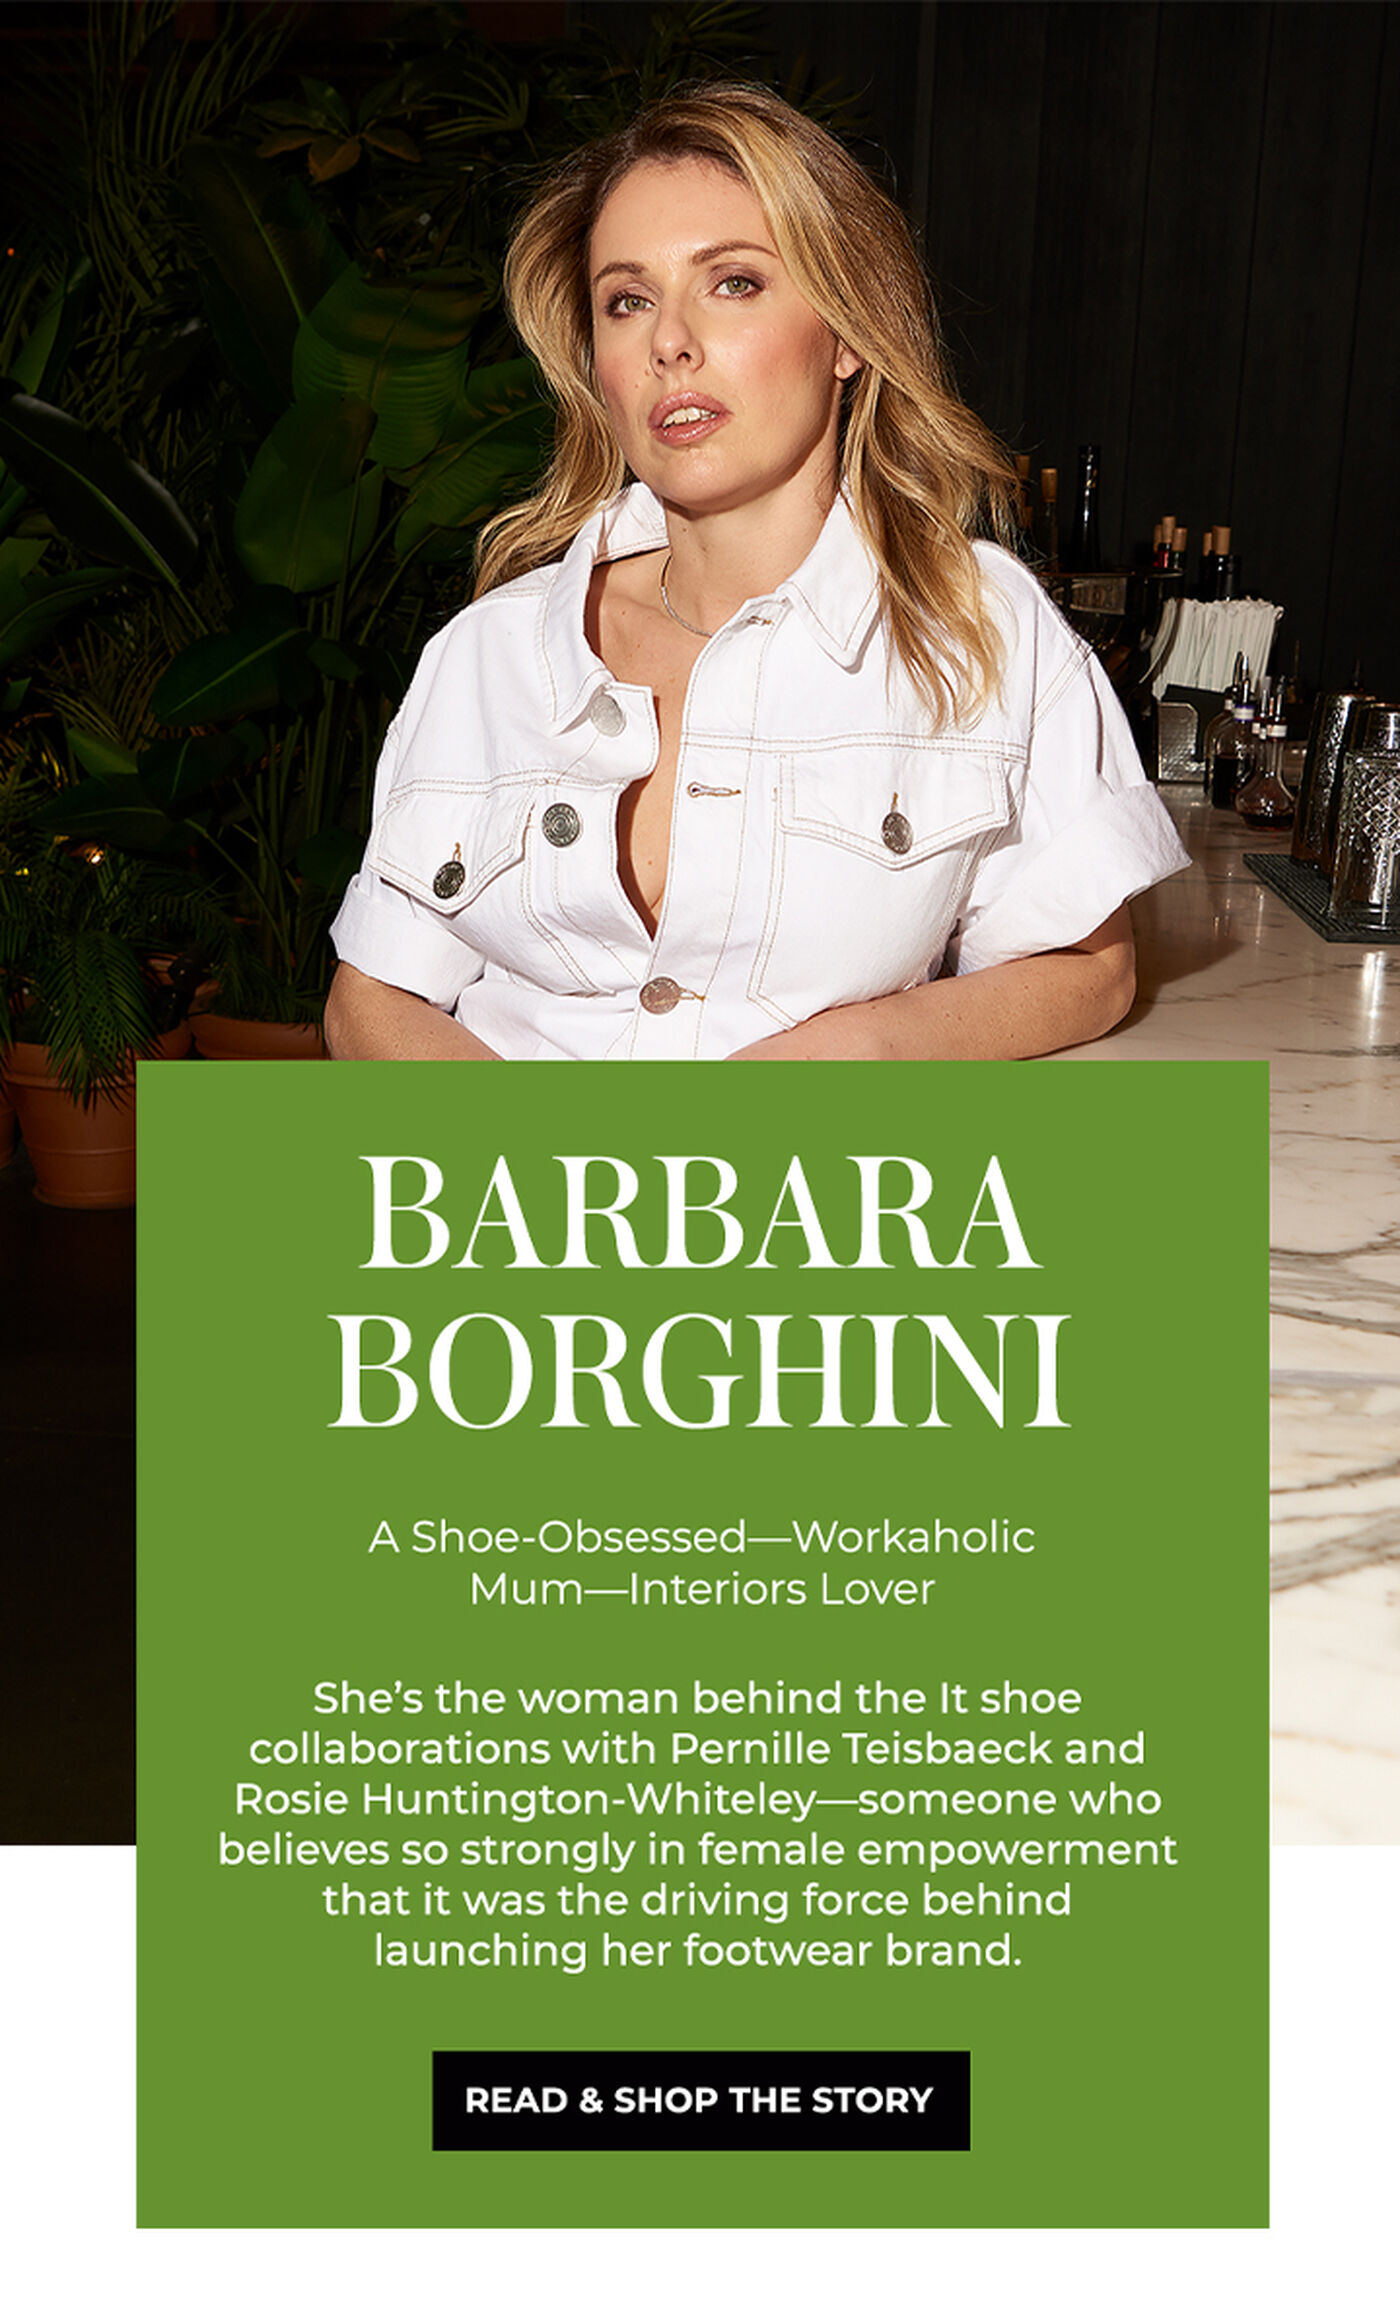 "BARBARA BORGHINI A Shoe-Obsessed-Workaholic Mum-Interiors Lover She's the woman behind the It shoe collaborations with Pernille Teisbaeck and Rosie Huntington-Whiteley -someone who believes so strongly in female empowerment that it was the driving force behind launching her footwear brand."